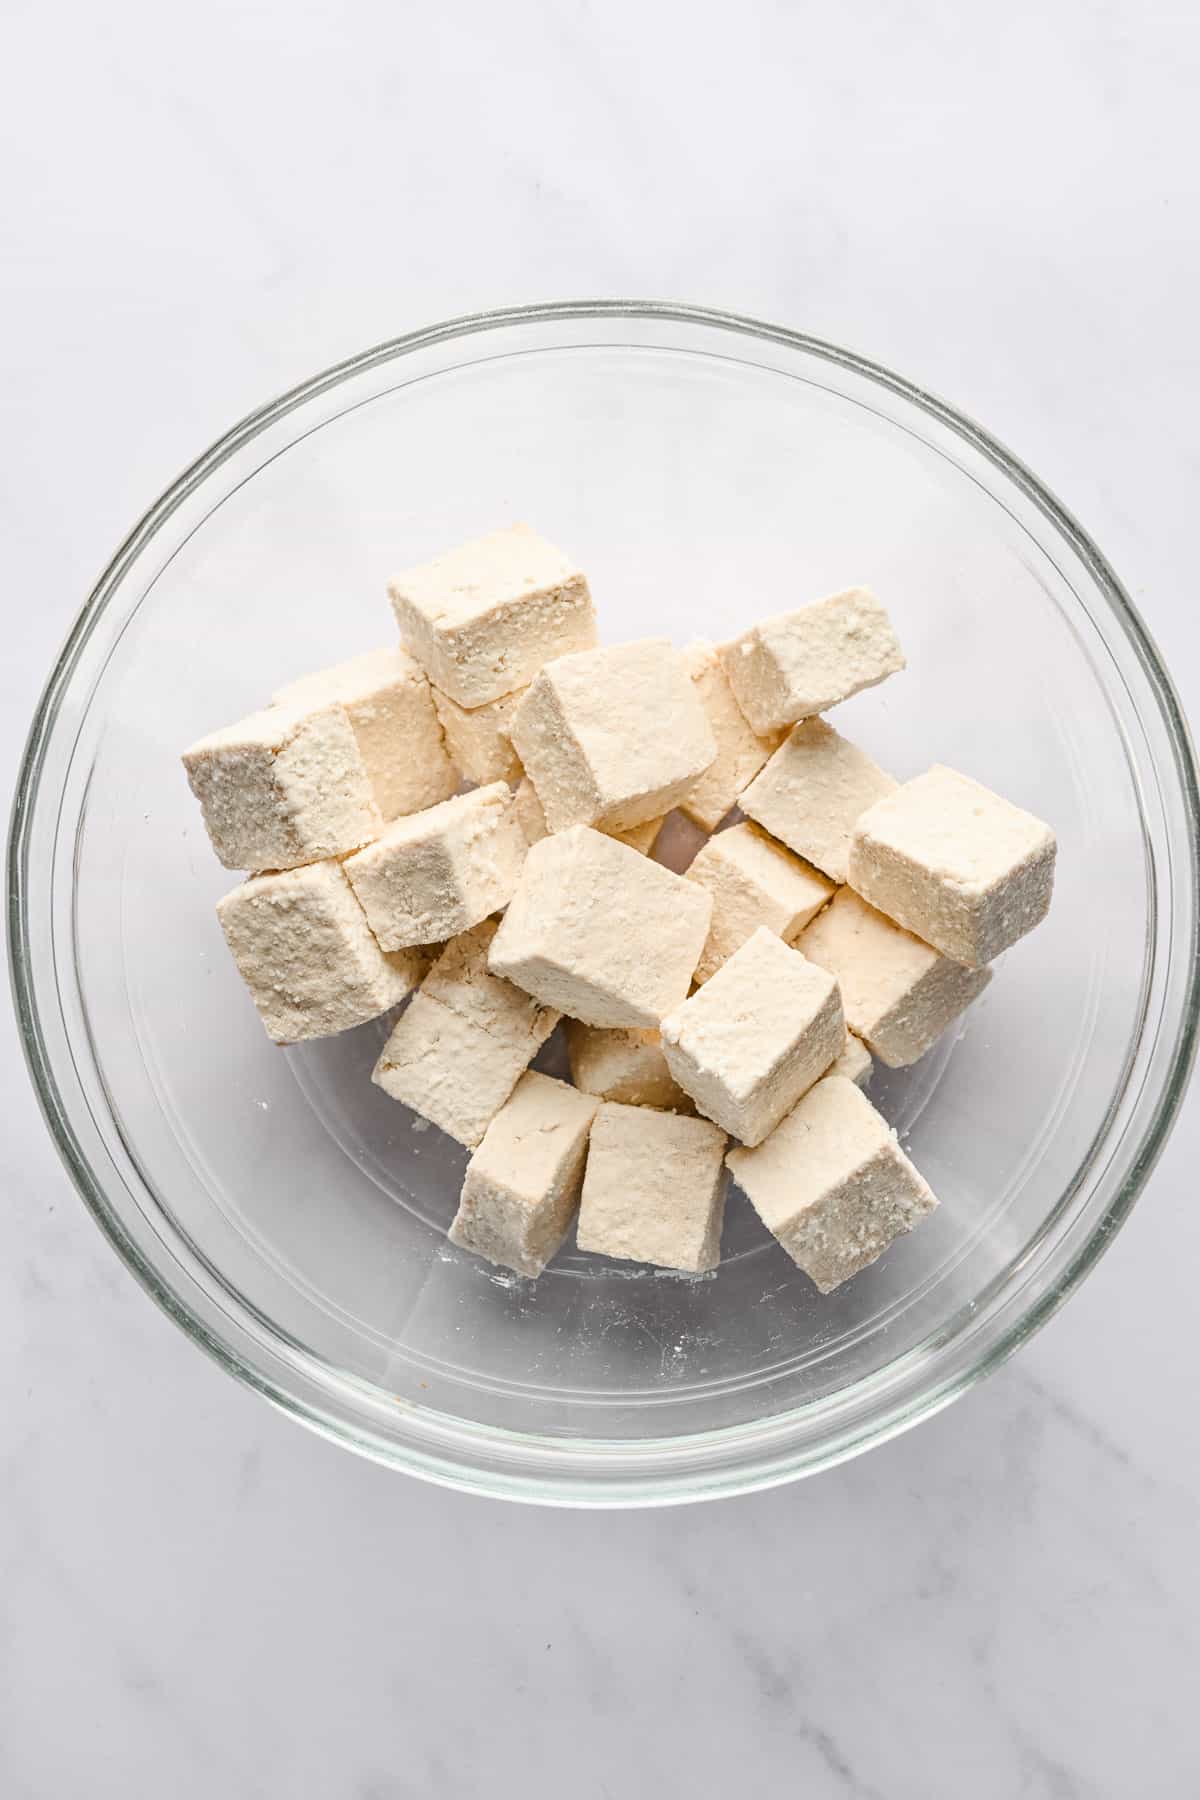 Cubed tofu coated with cornstarch in a glass bowl.